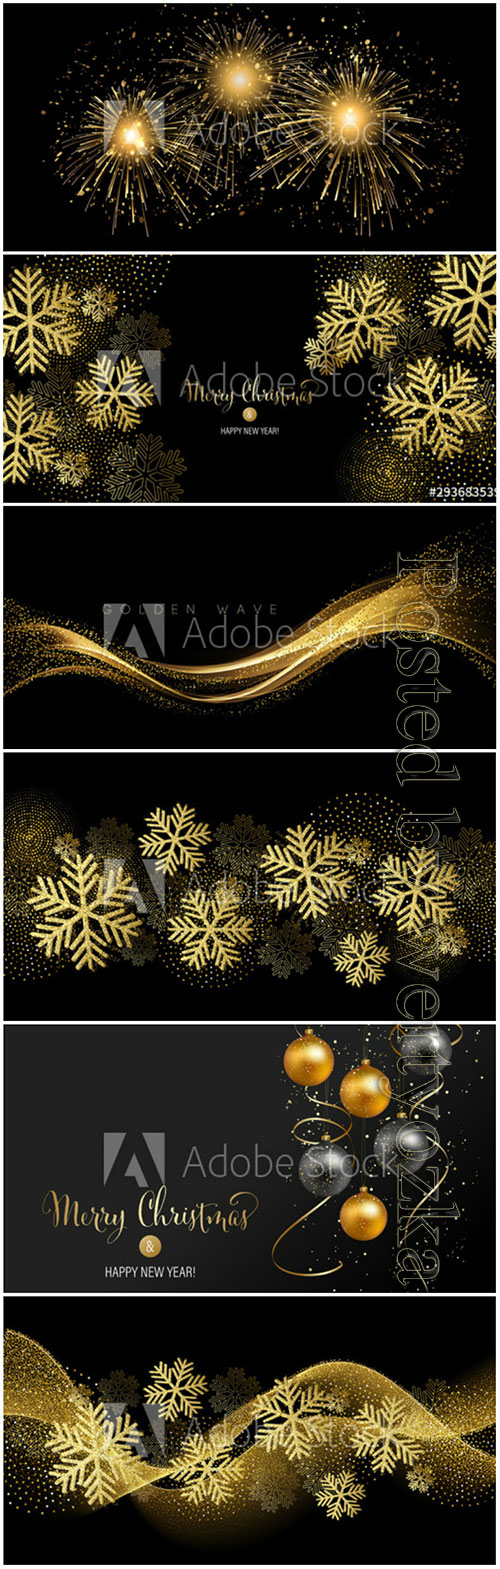 Snowflakes, salutes, Christmas balls on black vector backgrounds